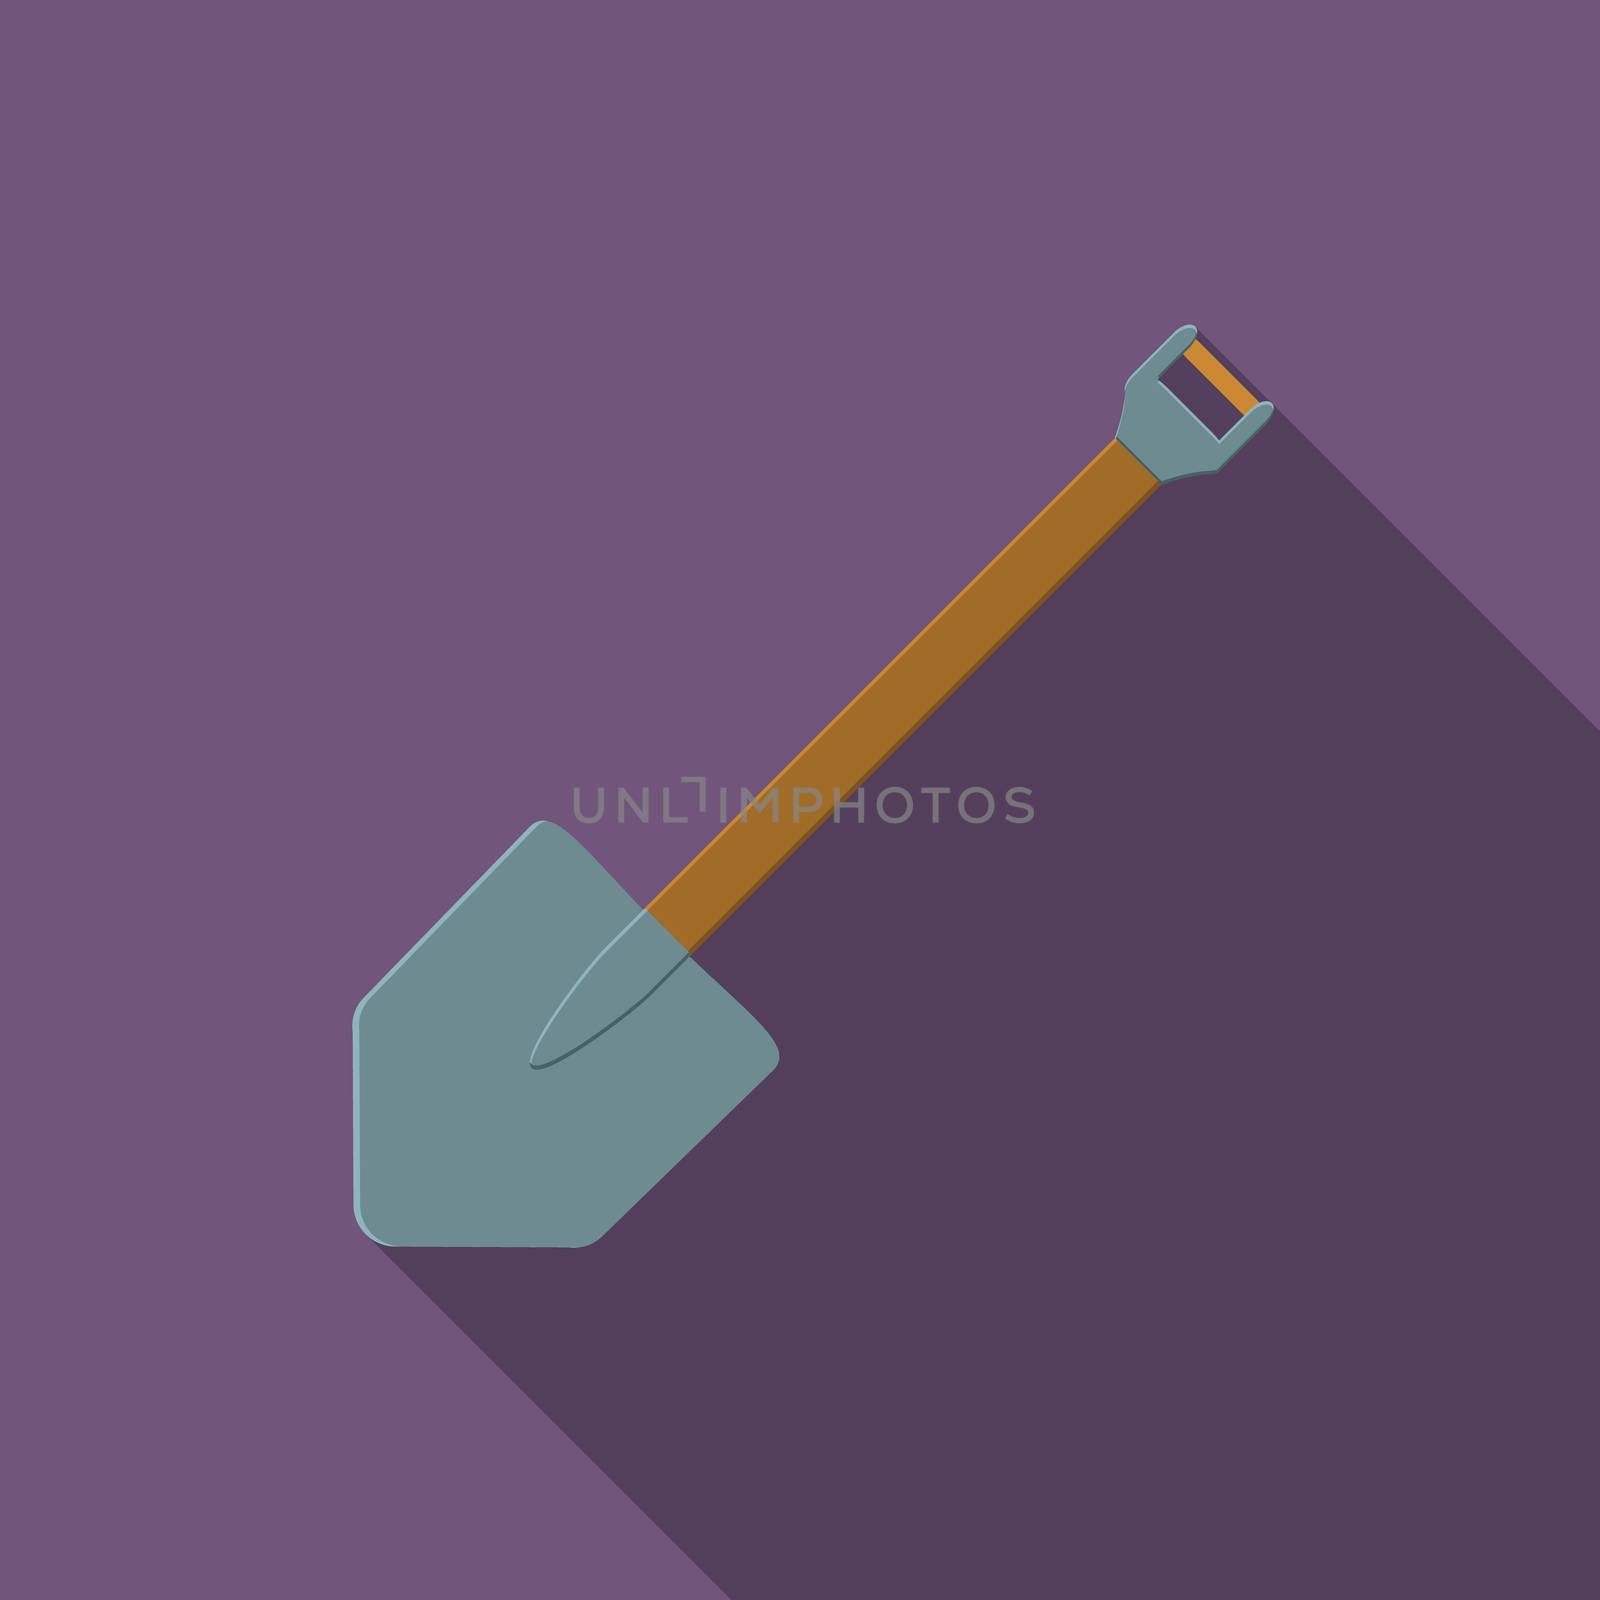 Flat design modern vector illustration of shovel icon, camping and gardening equipment with long shadow by Lemon_workshop